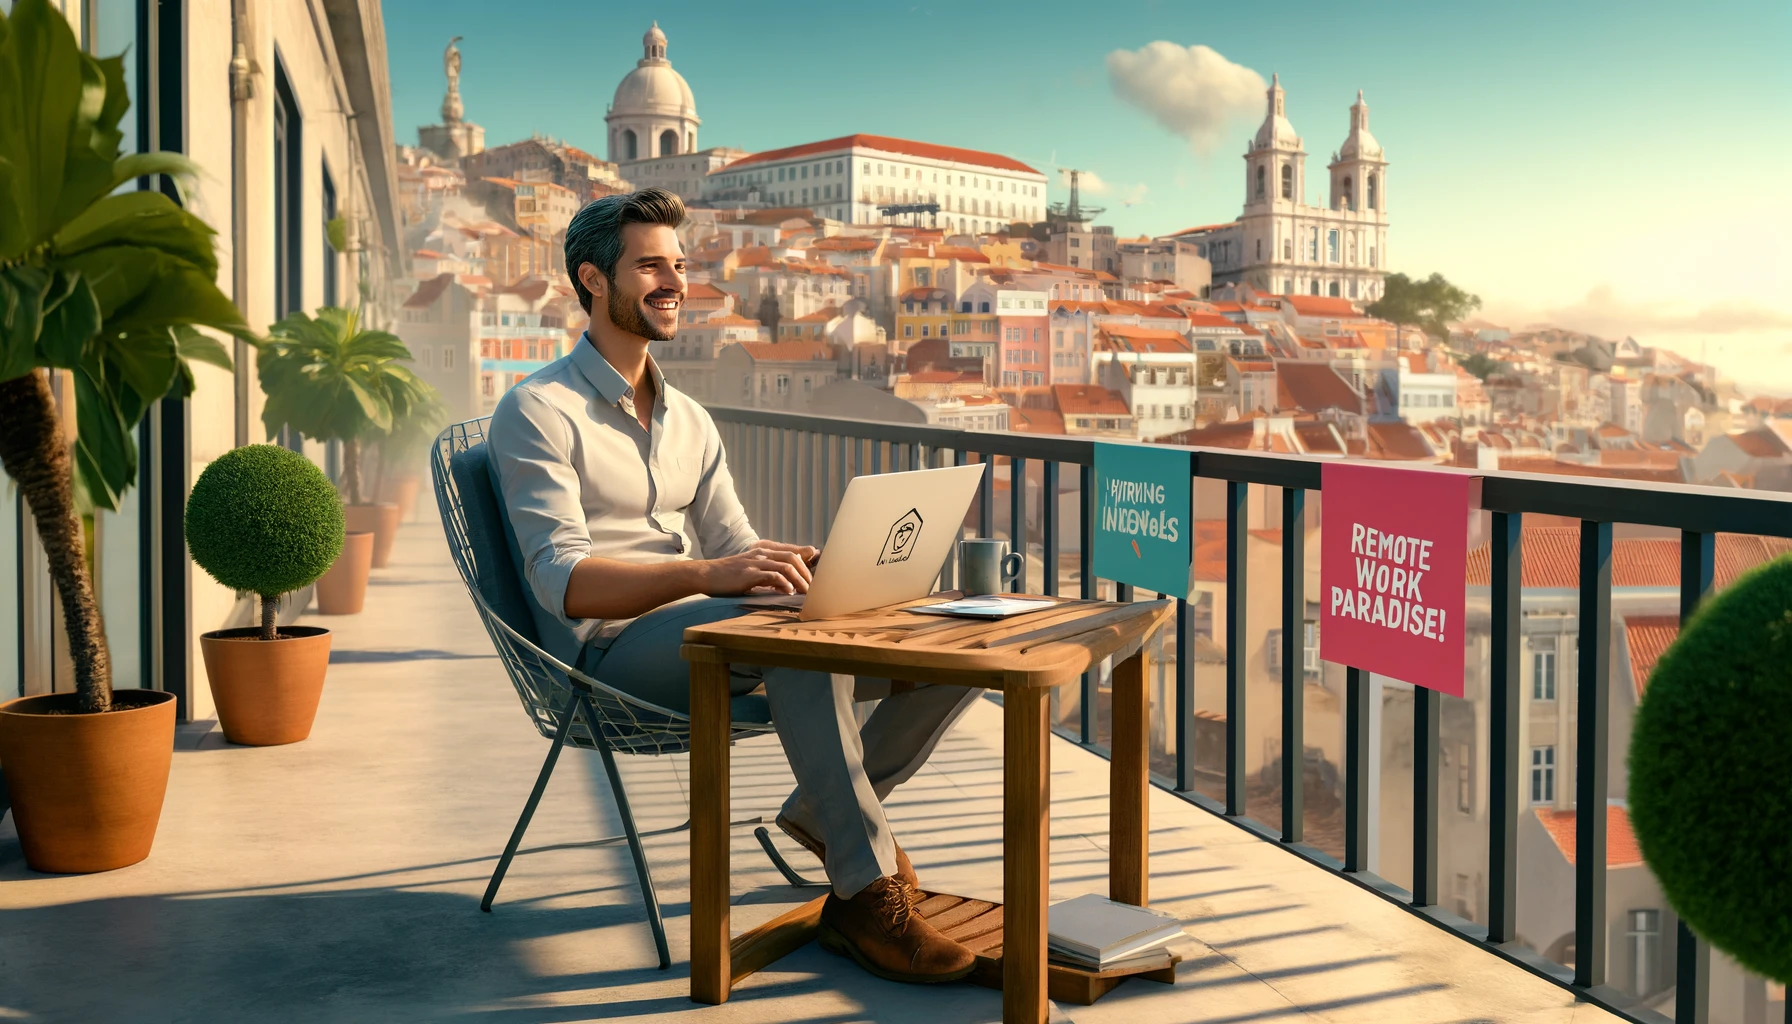 Photorealistic depiction of a remote worker on a sunny terrace in Lisbon, Portugal, with iconic landmarks in the background, a banner reading "Hiring in Portugal," and a speech bubble stating "Remote Work Paradise!"